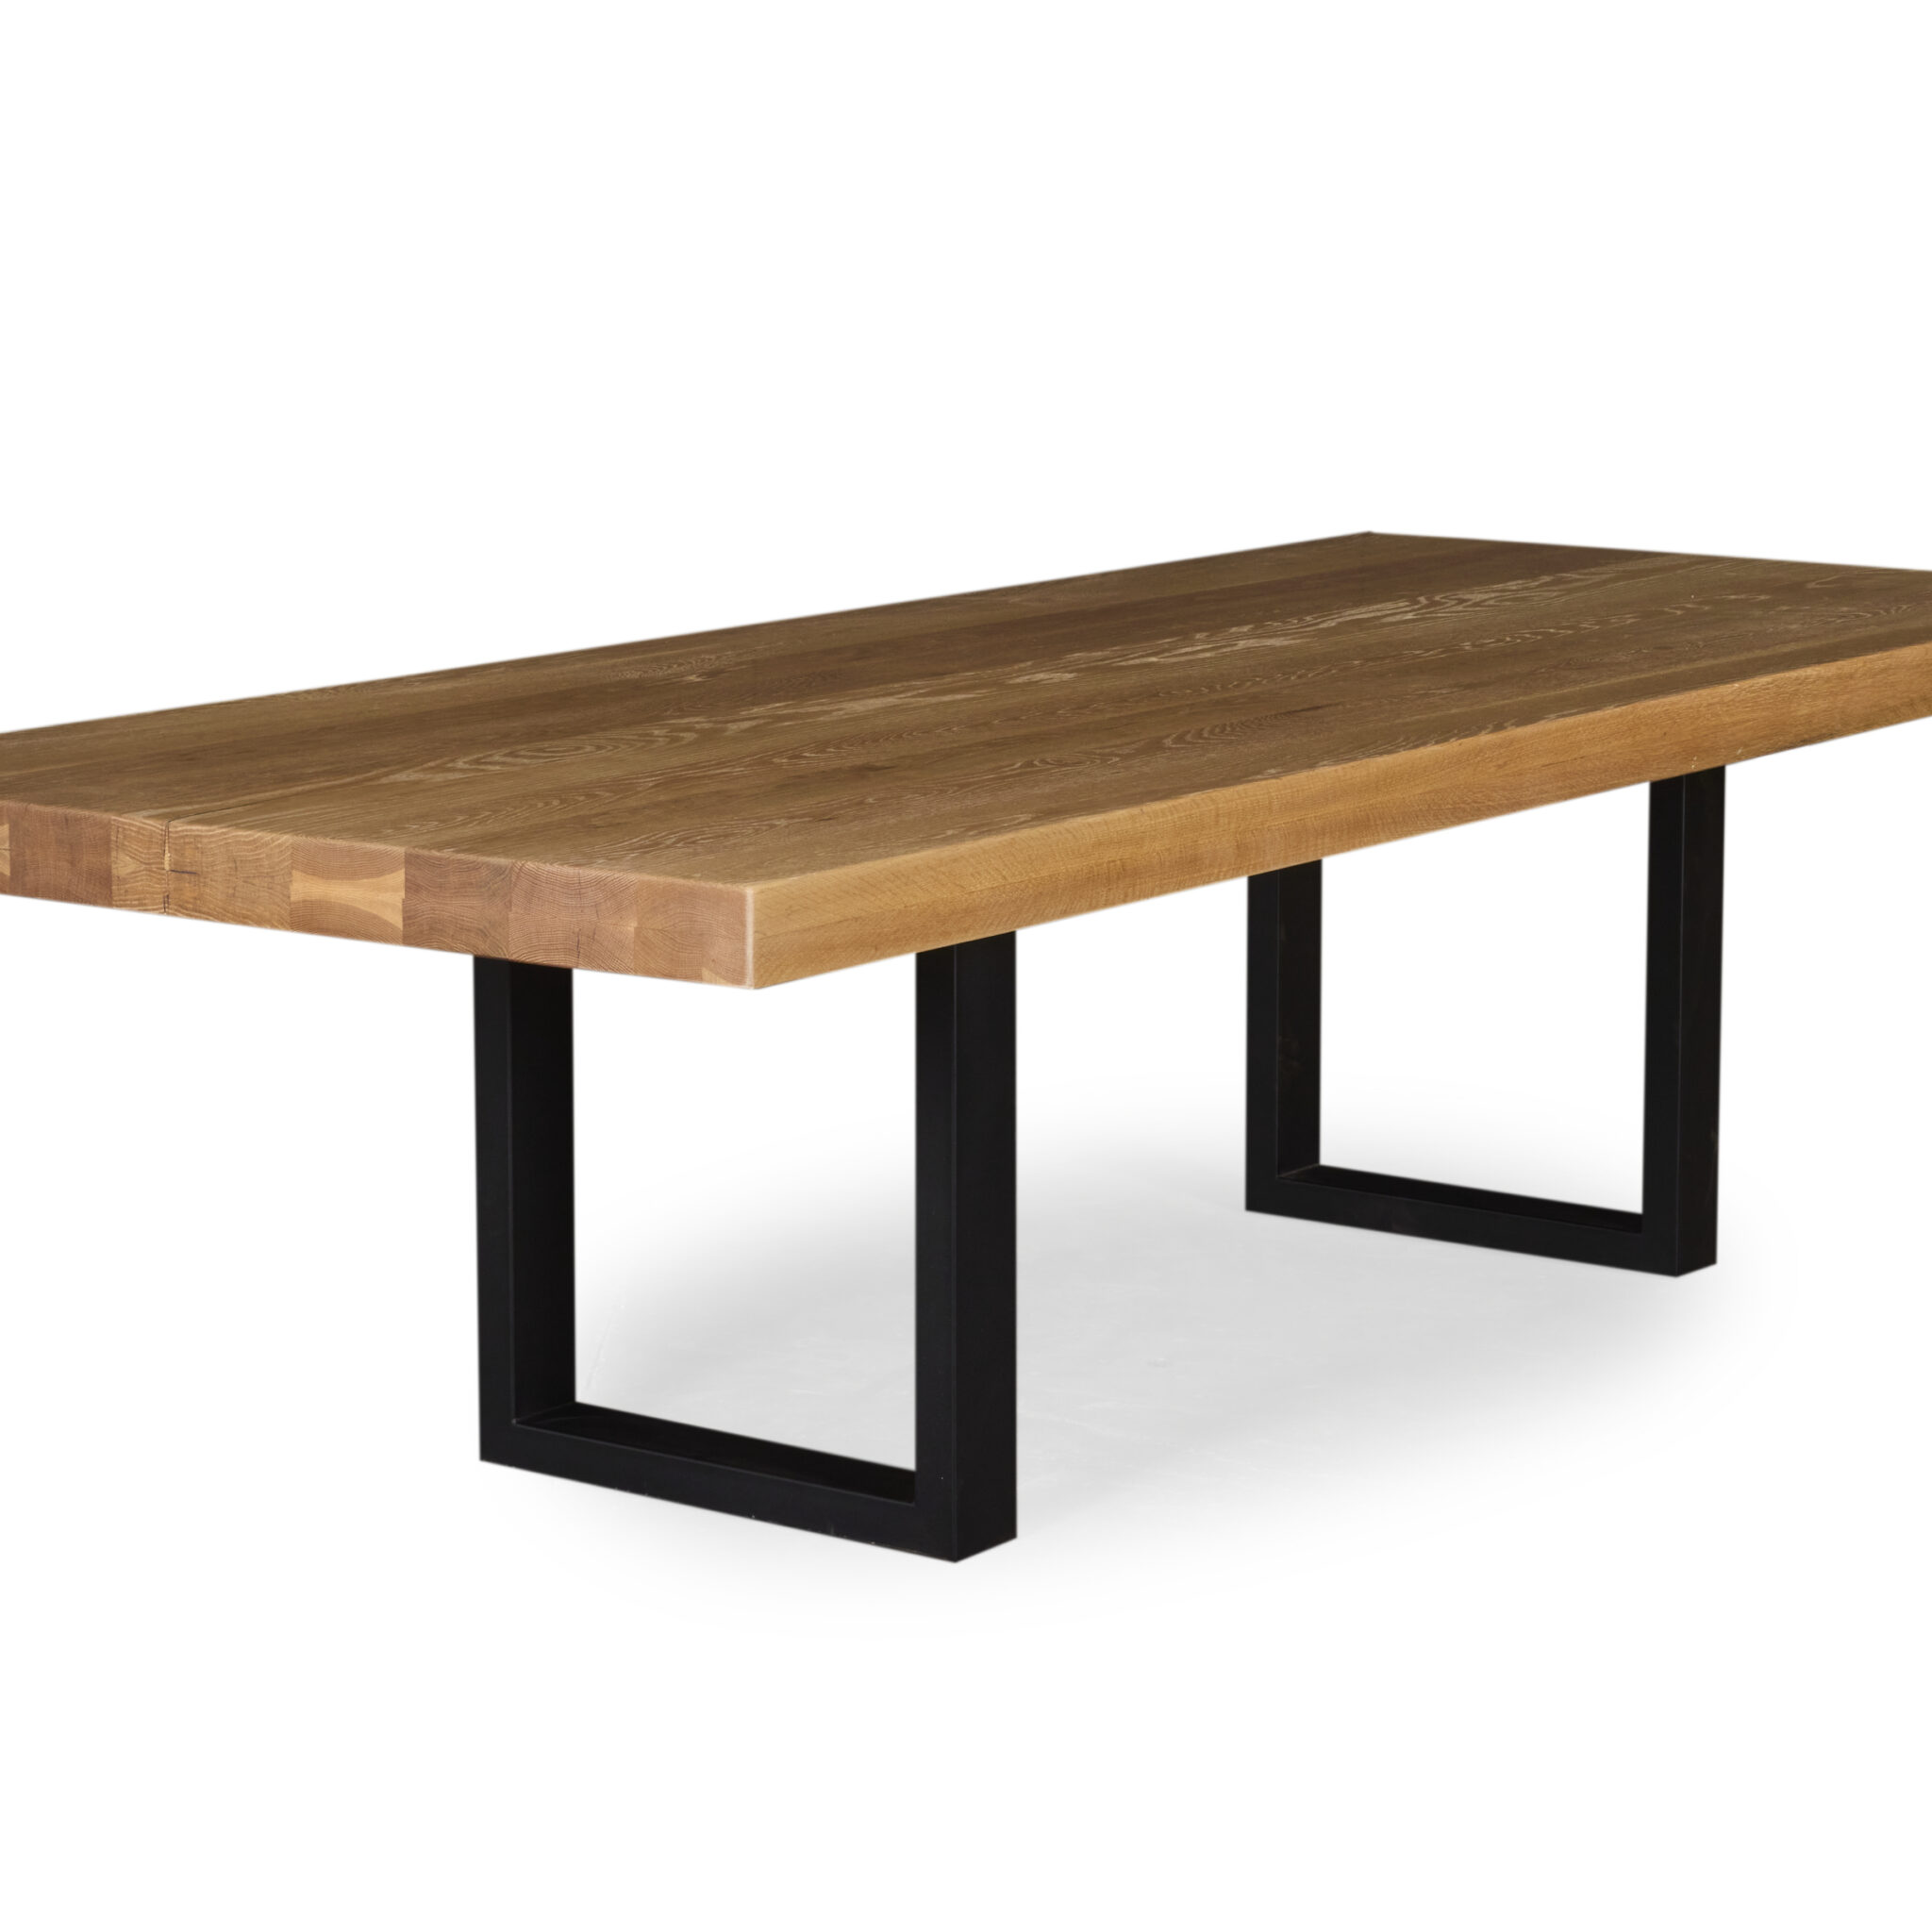 Richmond Dining Table - American Oak, U-leg timber base, white oil finish - In-stock for immediate delivery.